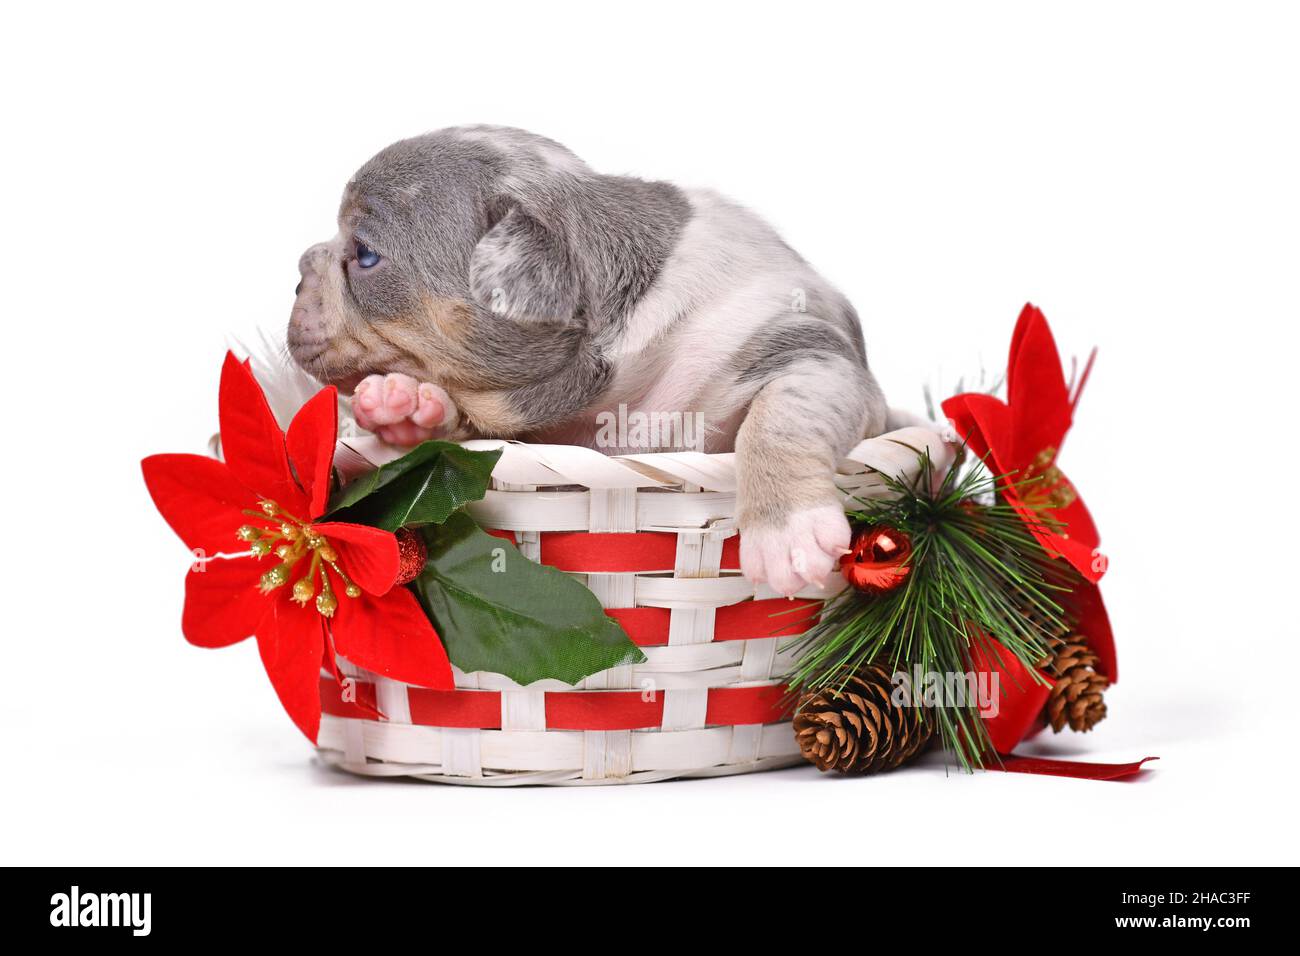 Merle French Bulldog dog puppy in Christmas basket with poinsettia flowers on white background Stock Photo